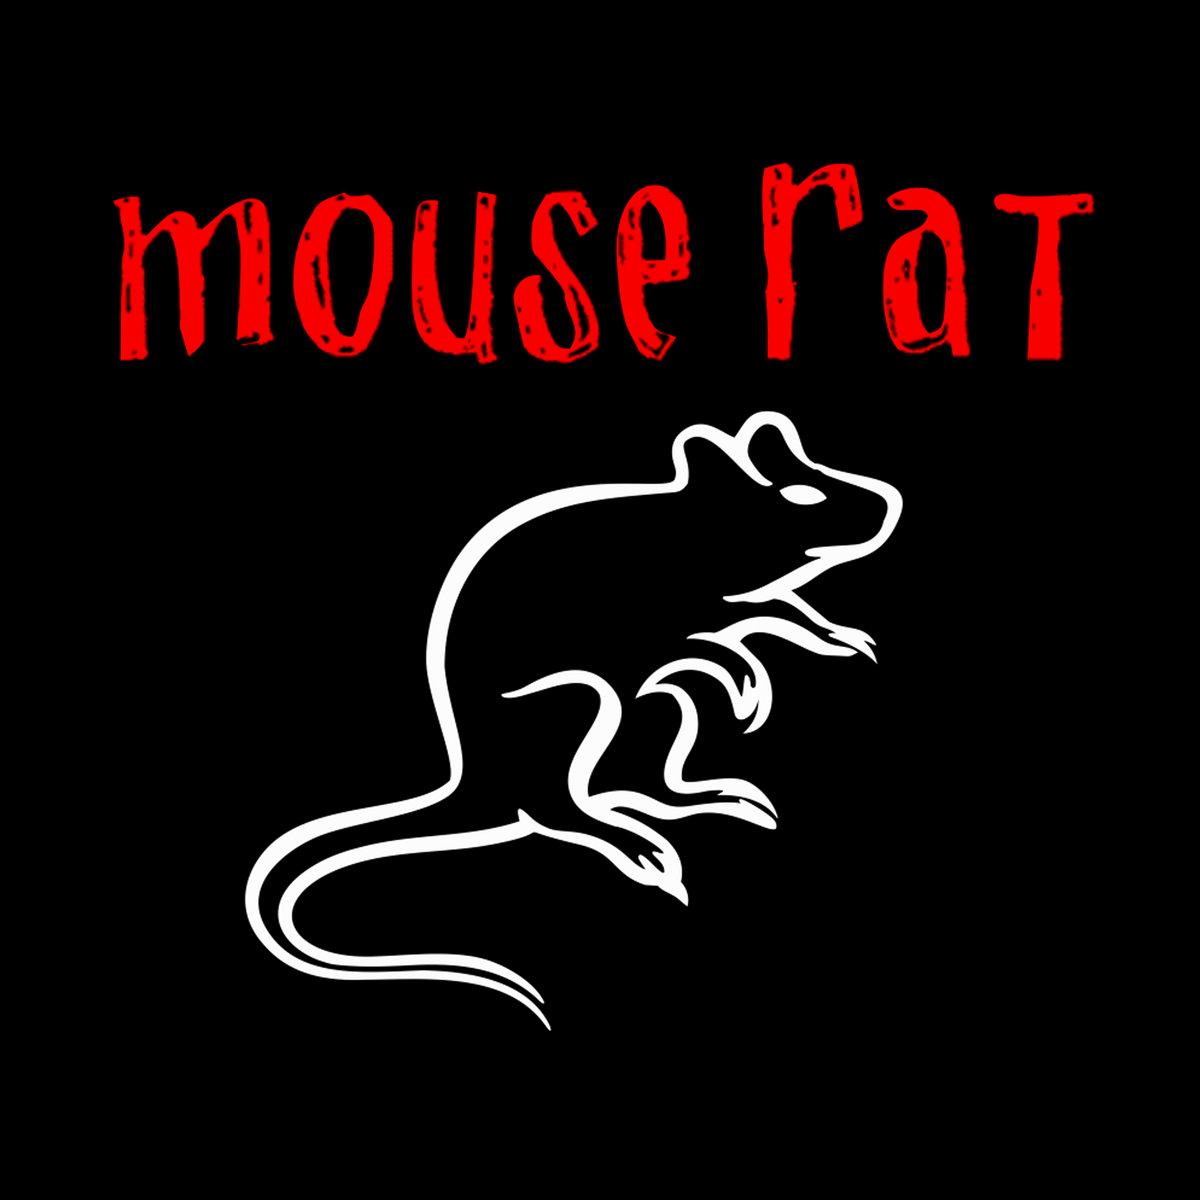 Parks and Recreation's Mouse Rat